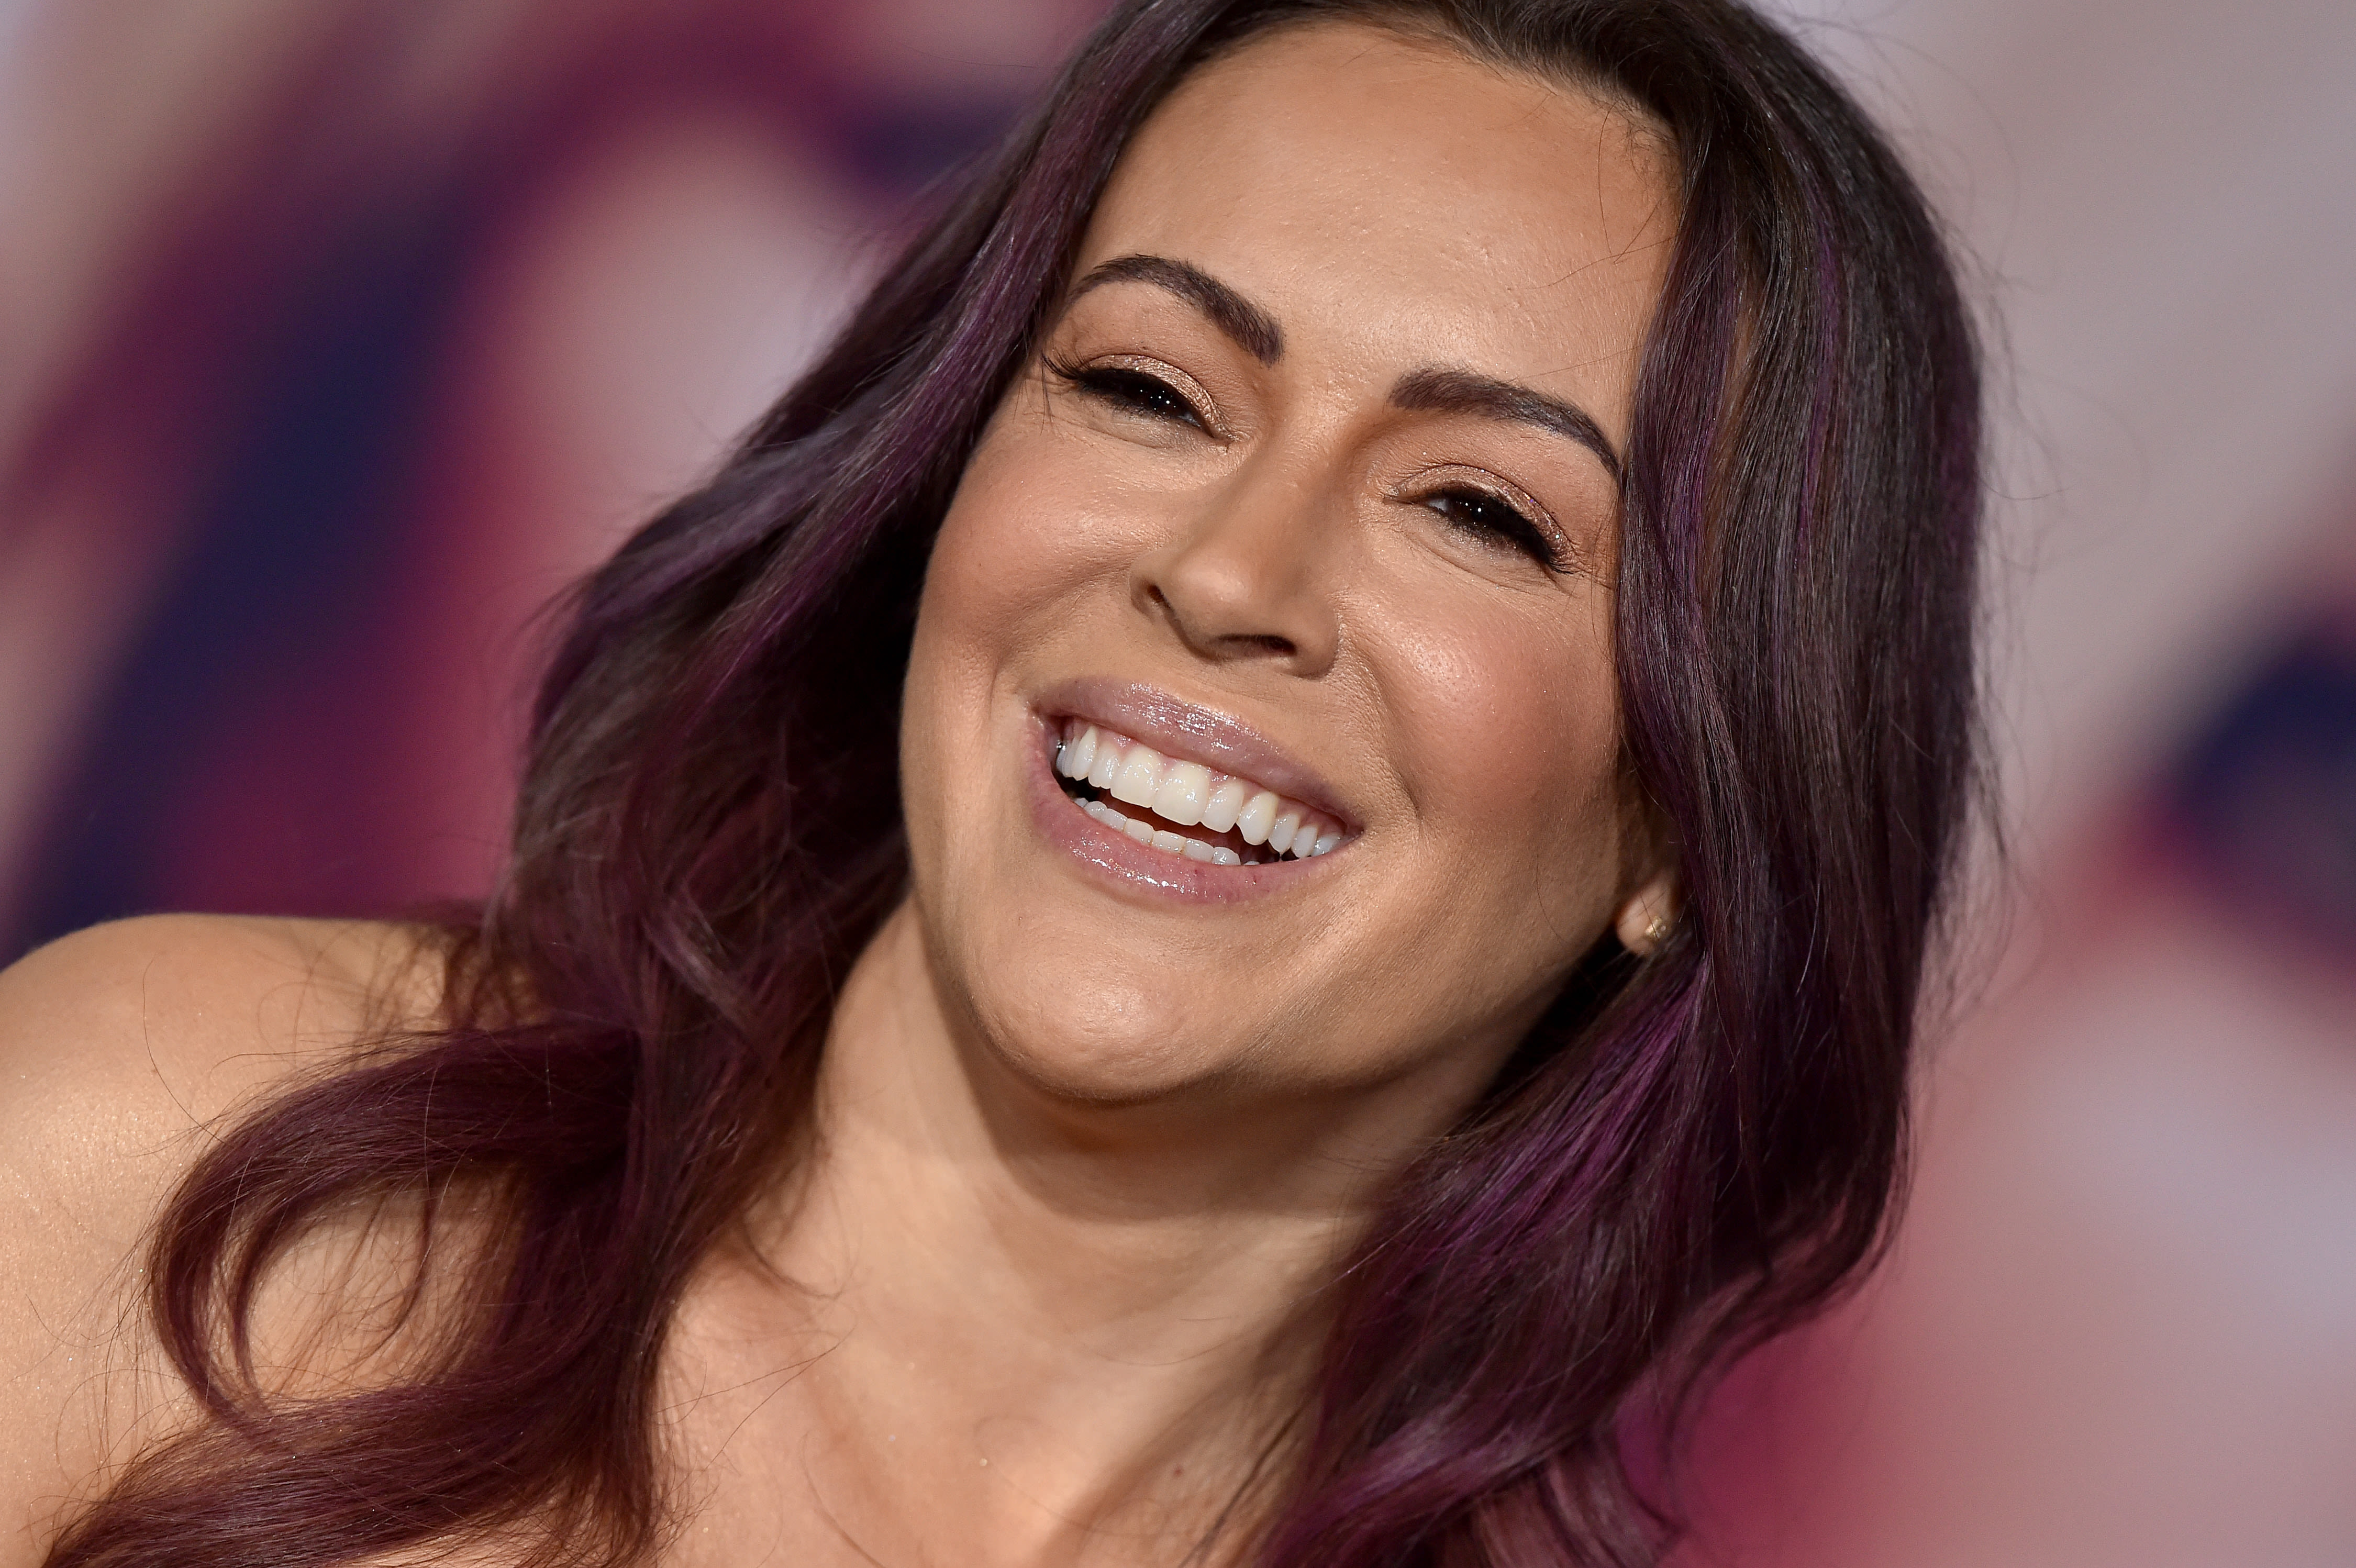 Alyssa Milano, 51, says Nioxin helped her hair loss — find the right kit for you